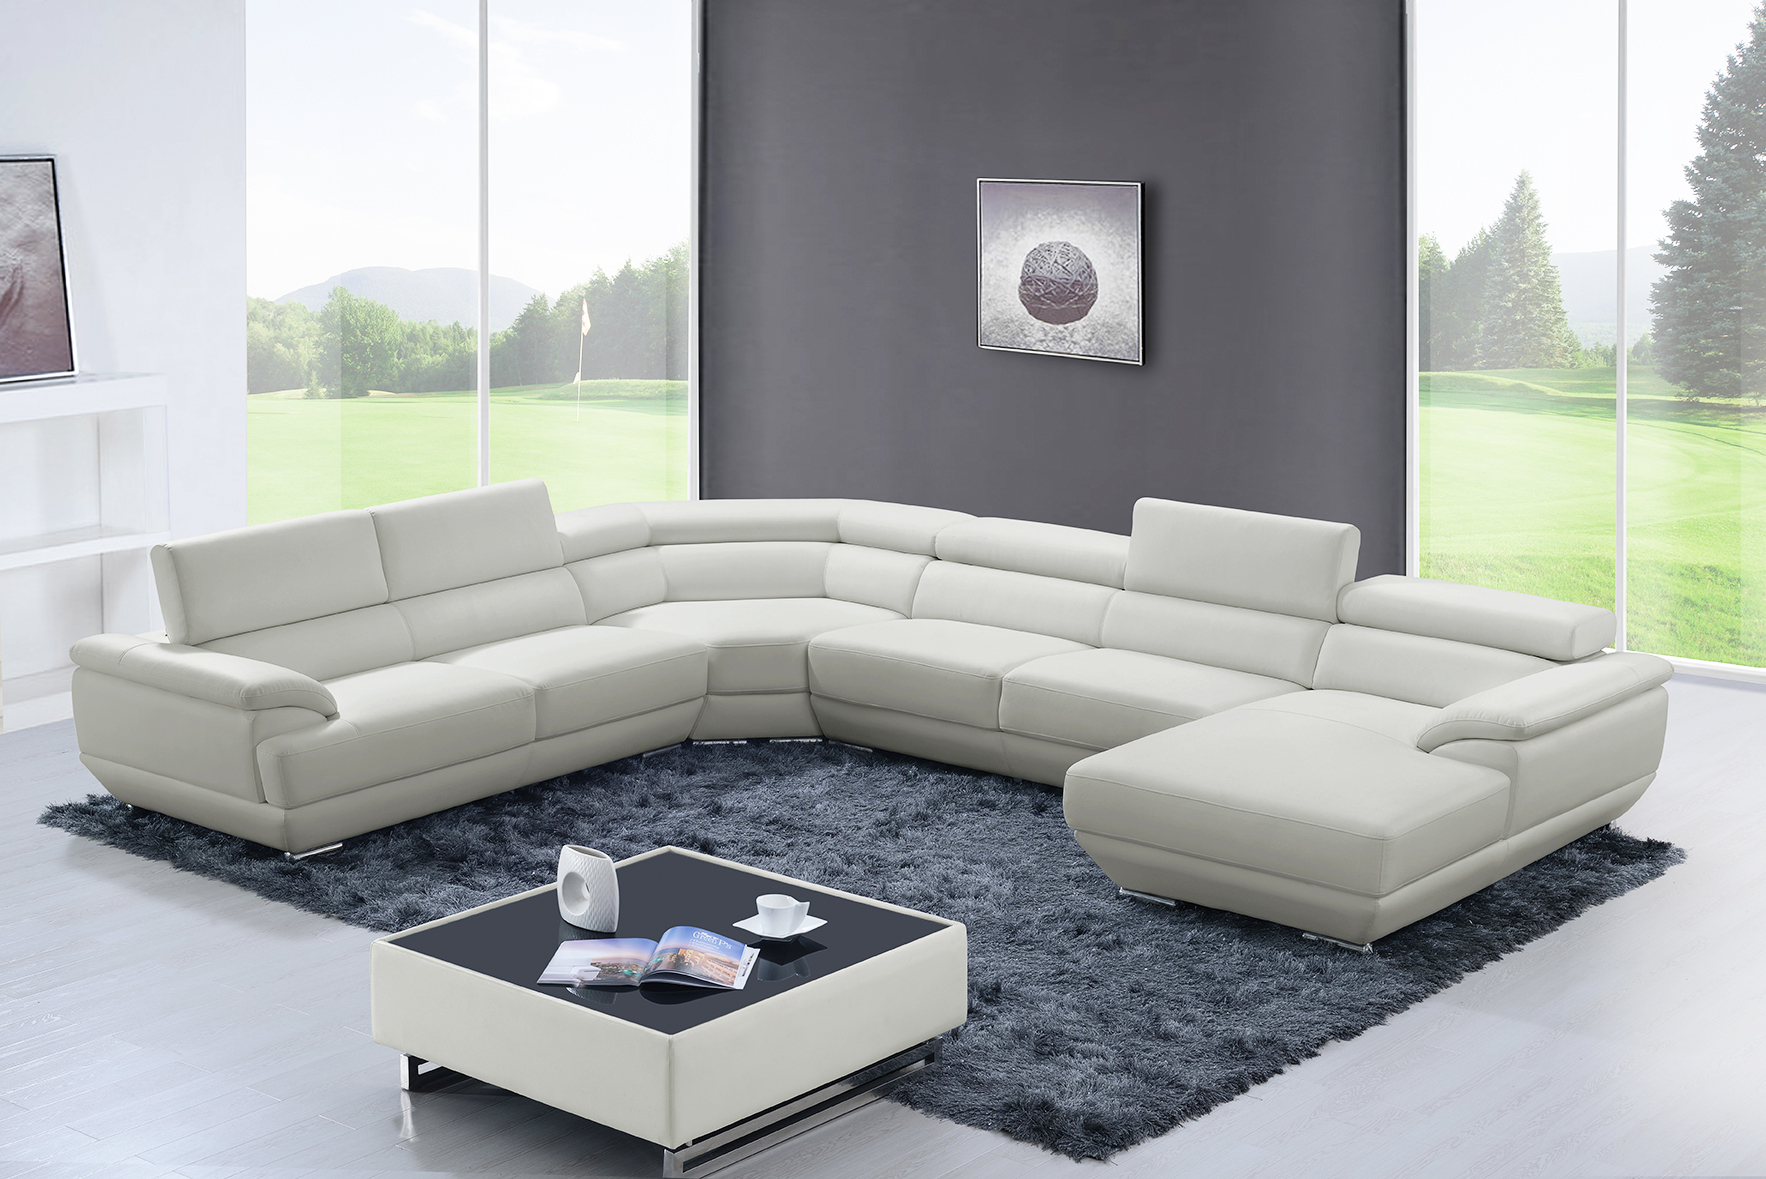 Off White Ivory Real Leather Couch Extra Large Size For Big Homes E L430 